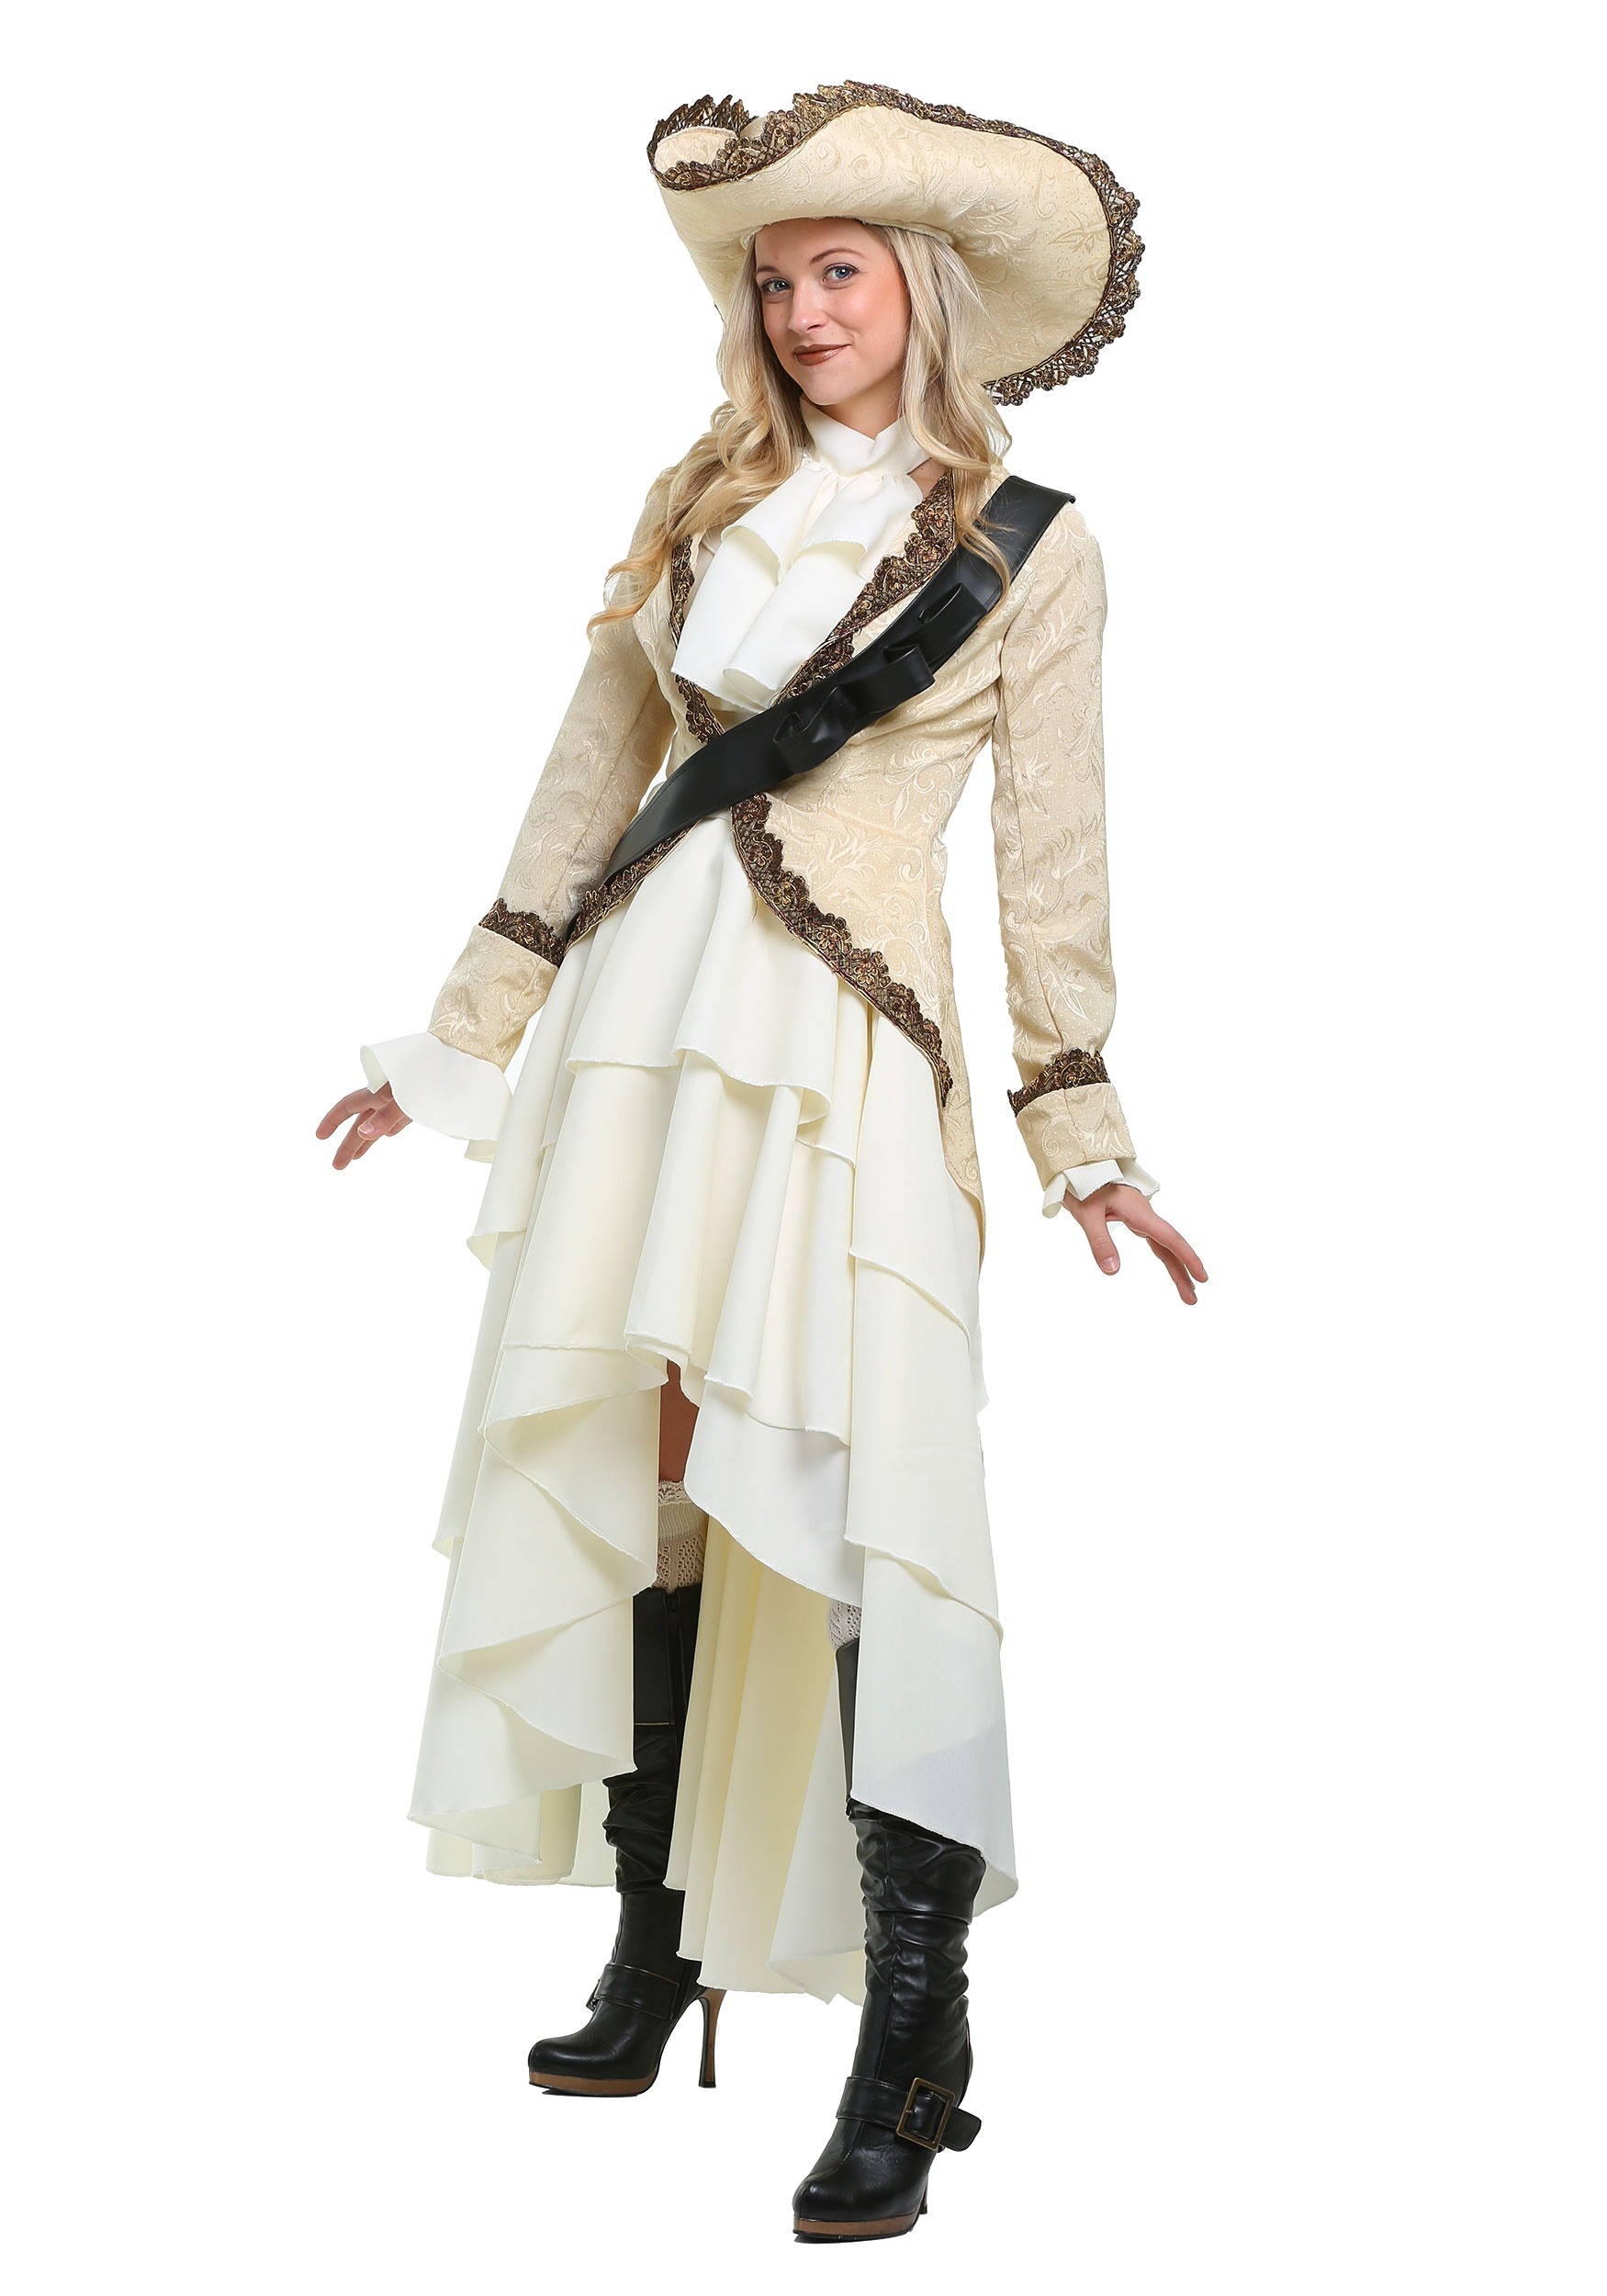 Photos - Fancy Dress Fancy FUN Costumes Captivating Pirate  Dress Costume for Women Brown/Be 